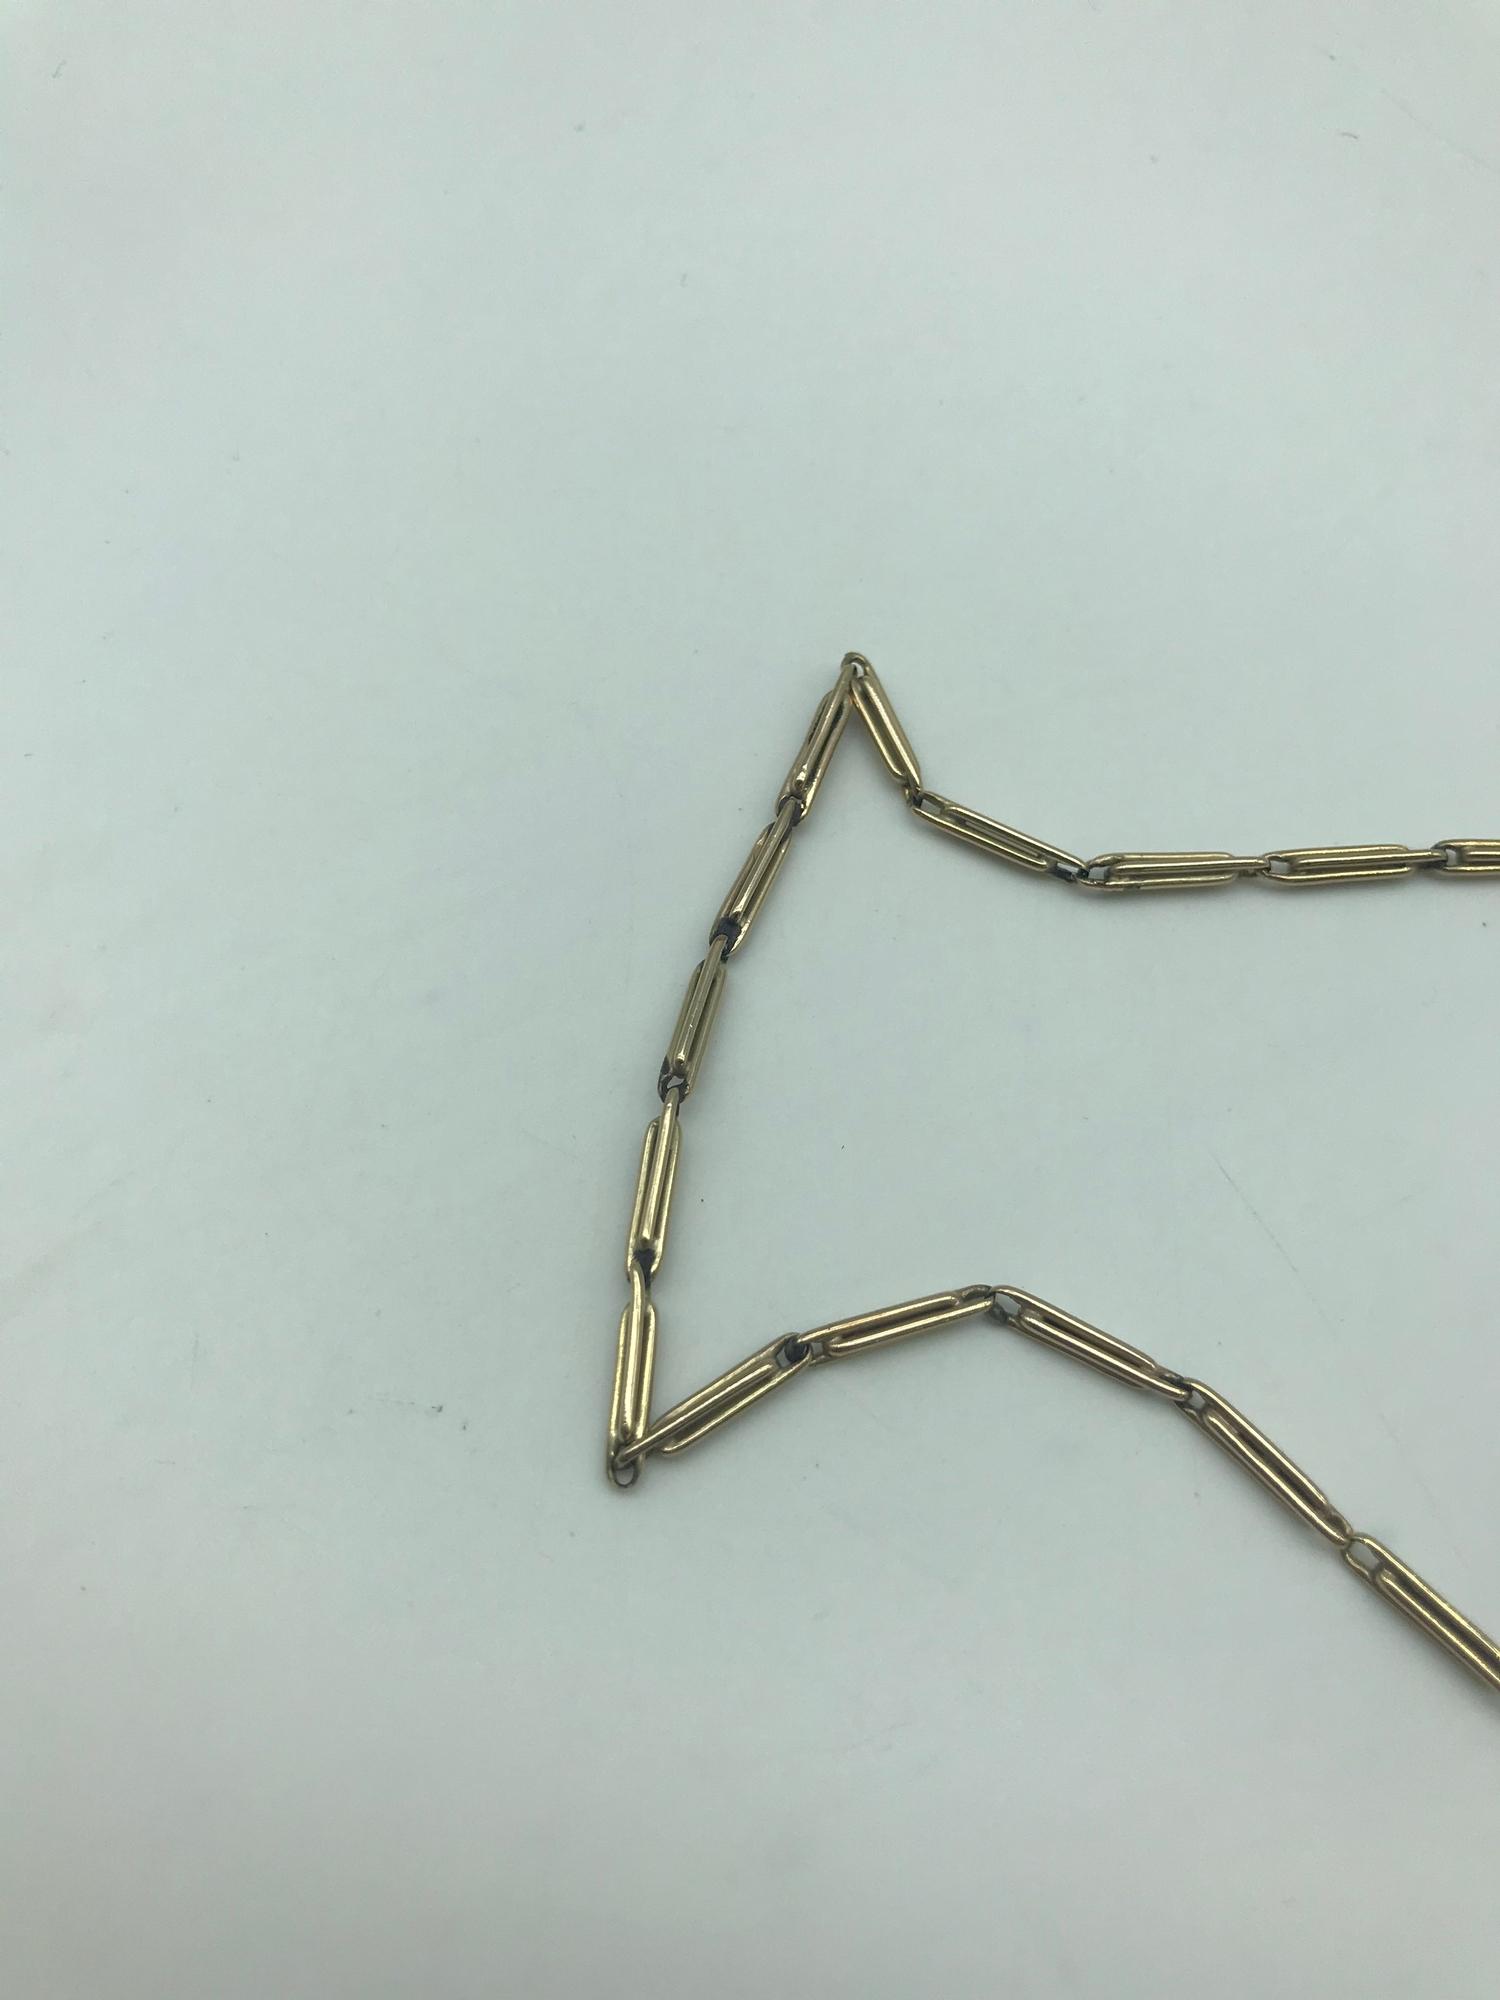 A 9ct gold Necklace possibly an Albert Chain. Measures 22inches. Weighs 12.77grams - Image 4 of 4